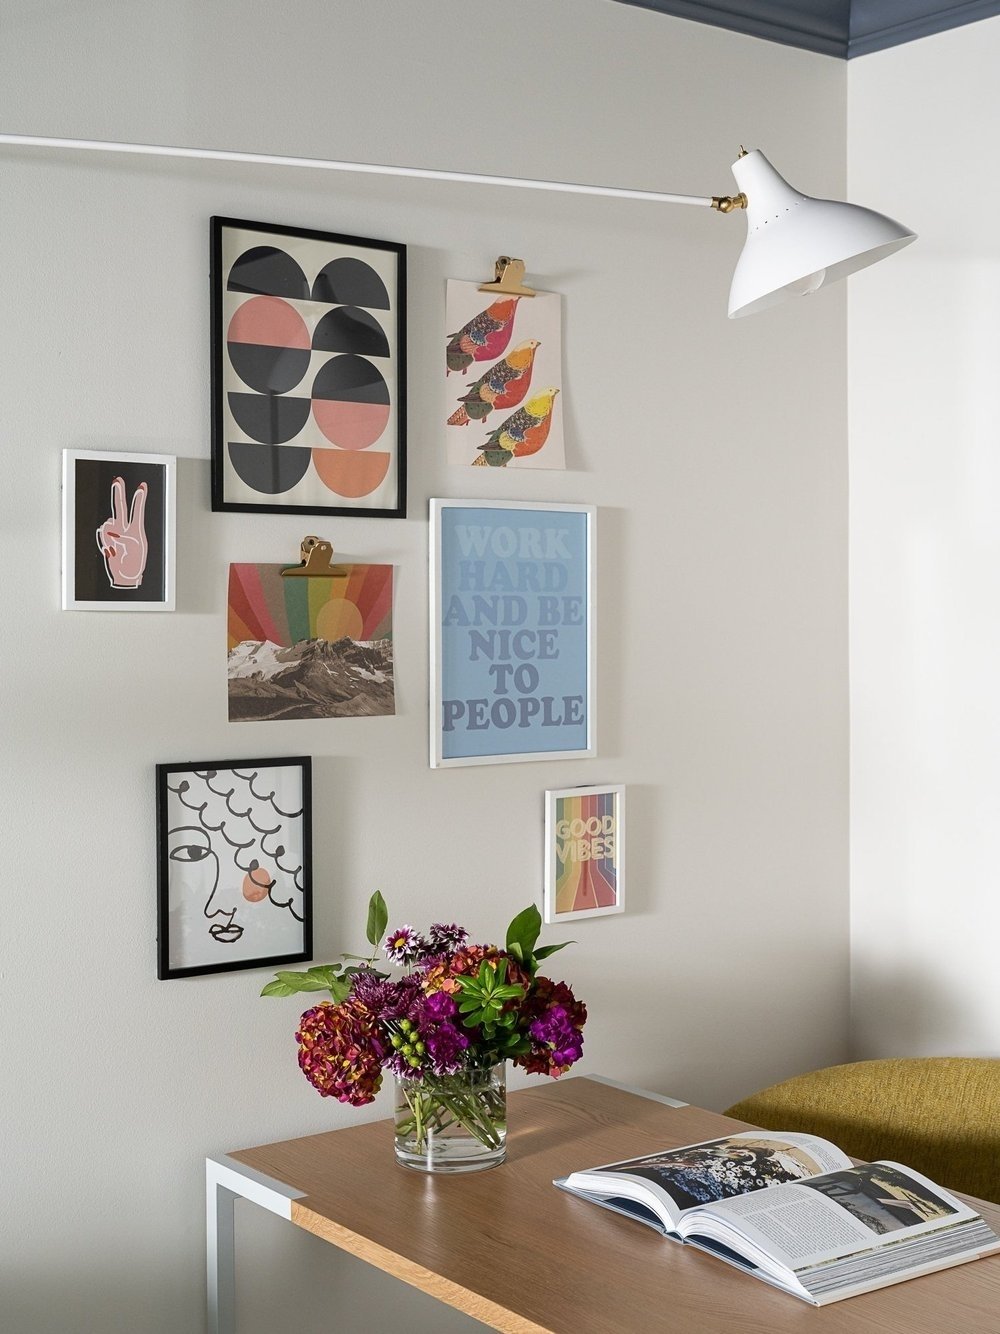 In an age where remote work is becoming increasingly prevalent, the home office has transformed from a mere workspace to a sanctuary of productivity and creativity. 

Crafting a functional and stylish home office is not just about setting up a desk a